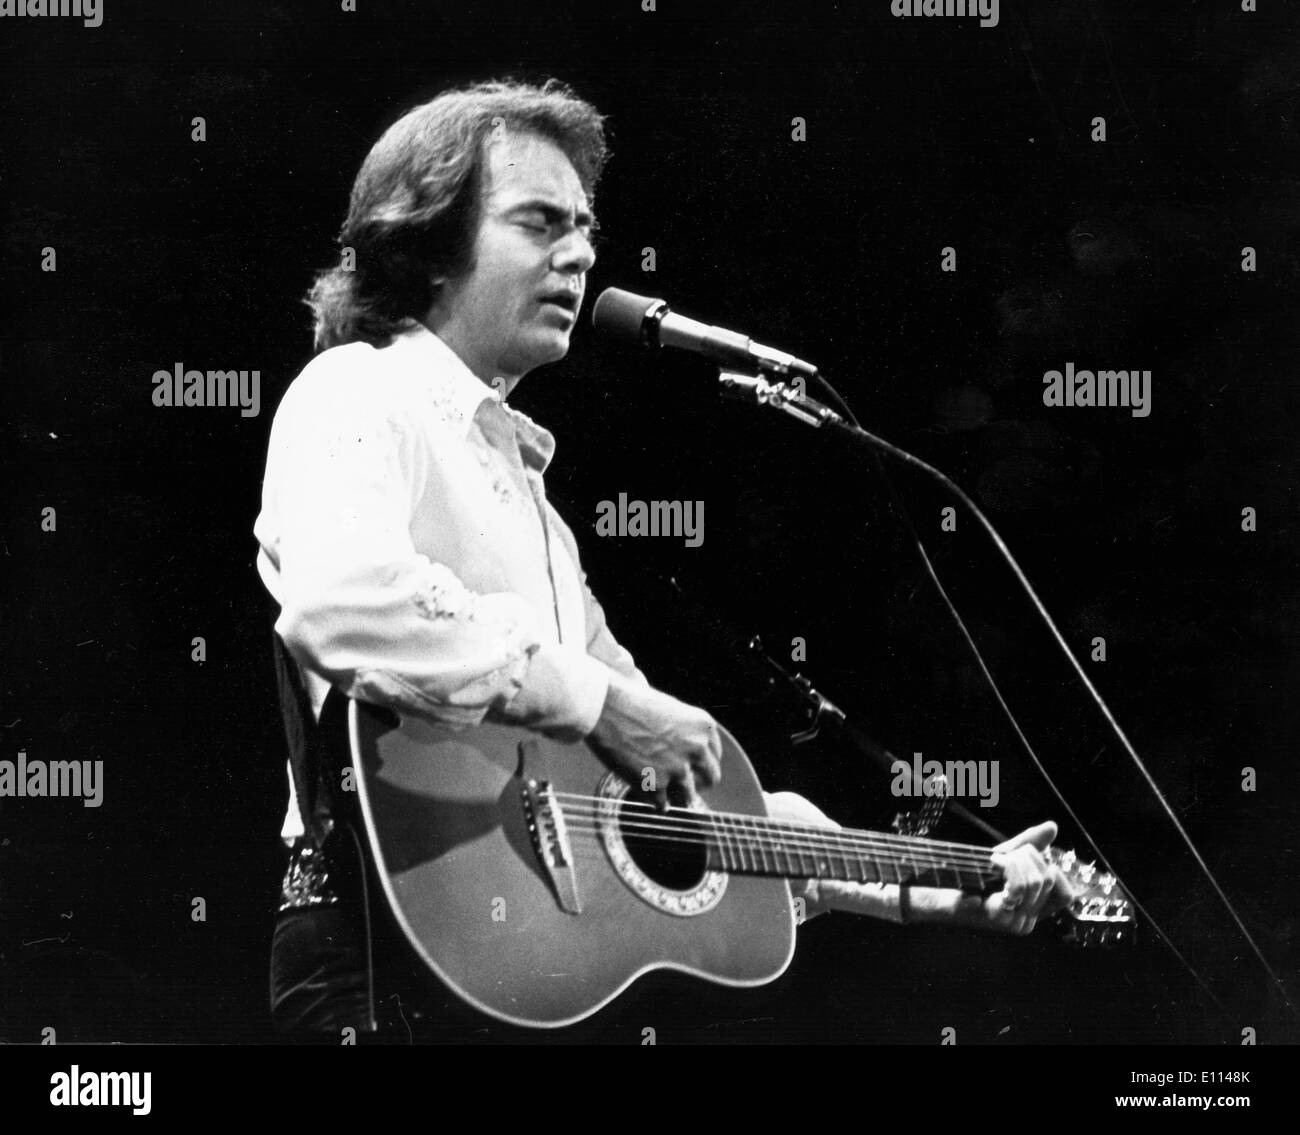 Aug 05, 1975 - London, England, United Kingdom - NEIL DIAMOND performs. Neil Leslie Diamond (born January 24, 1941) is an American singer-songwriter. Neil Diamond is one of pop music's most enduring and successful singer-songwriters. As a successful pop music performer, Diamond scored a number of hits worldwide in the 1960s, 1970s, and 1980s. c. late 1970s. Stock Photo